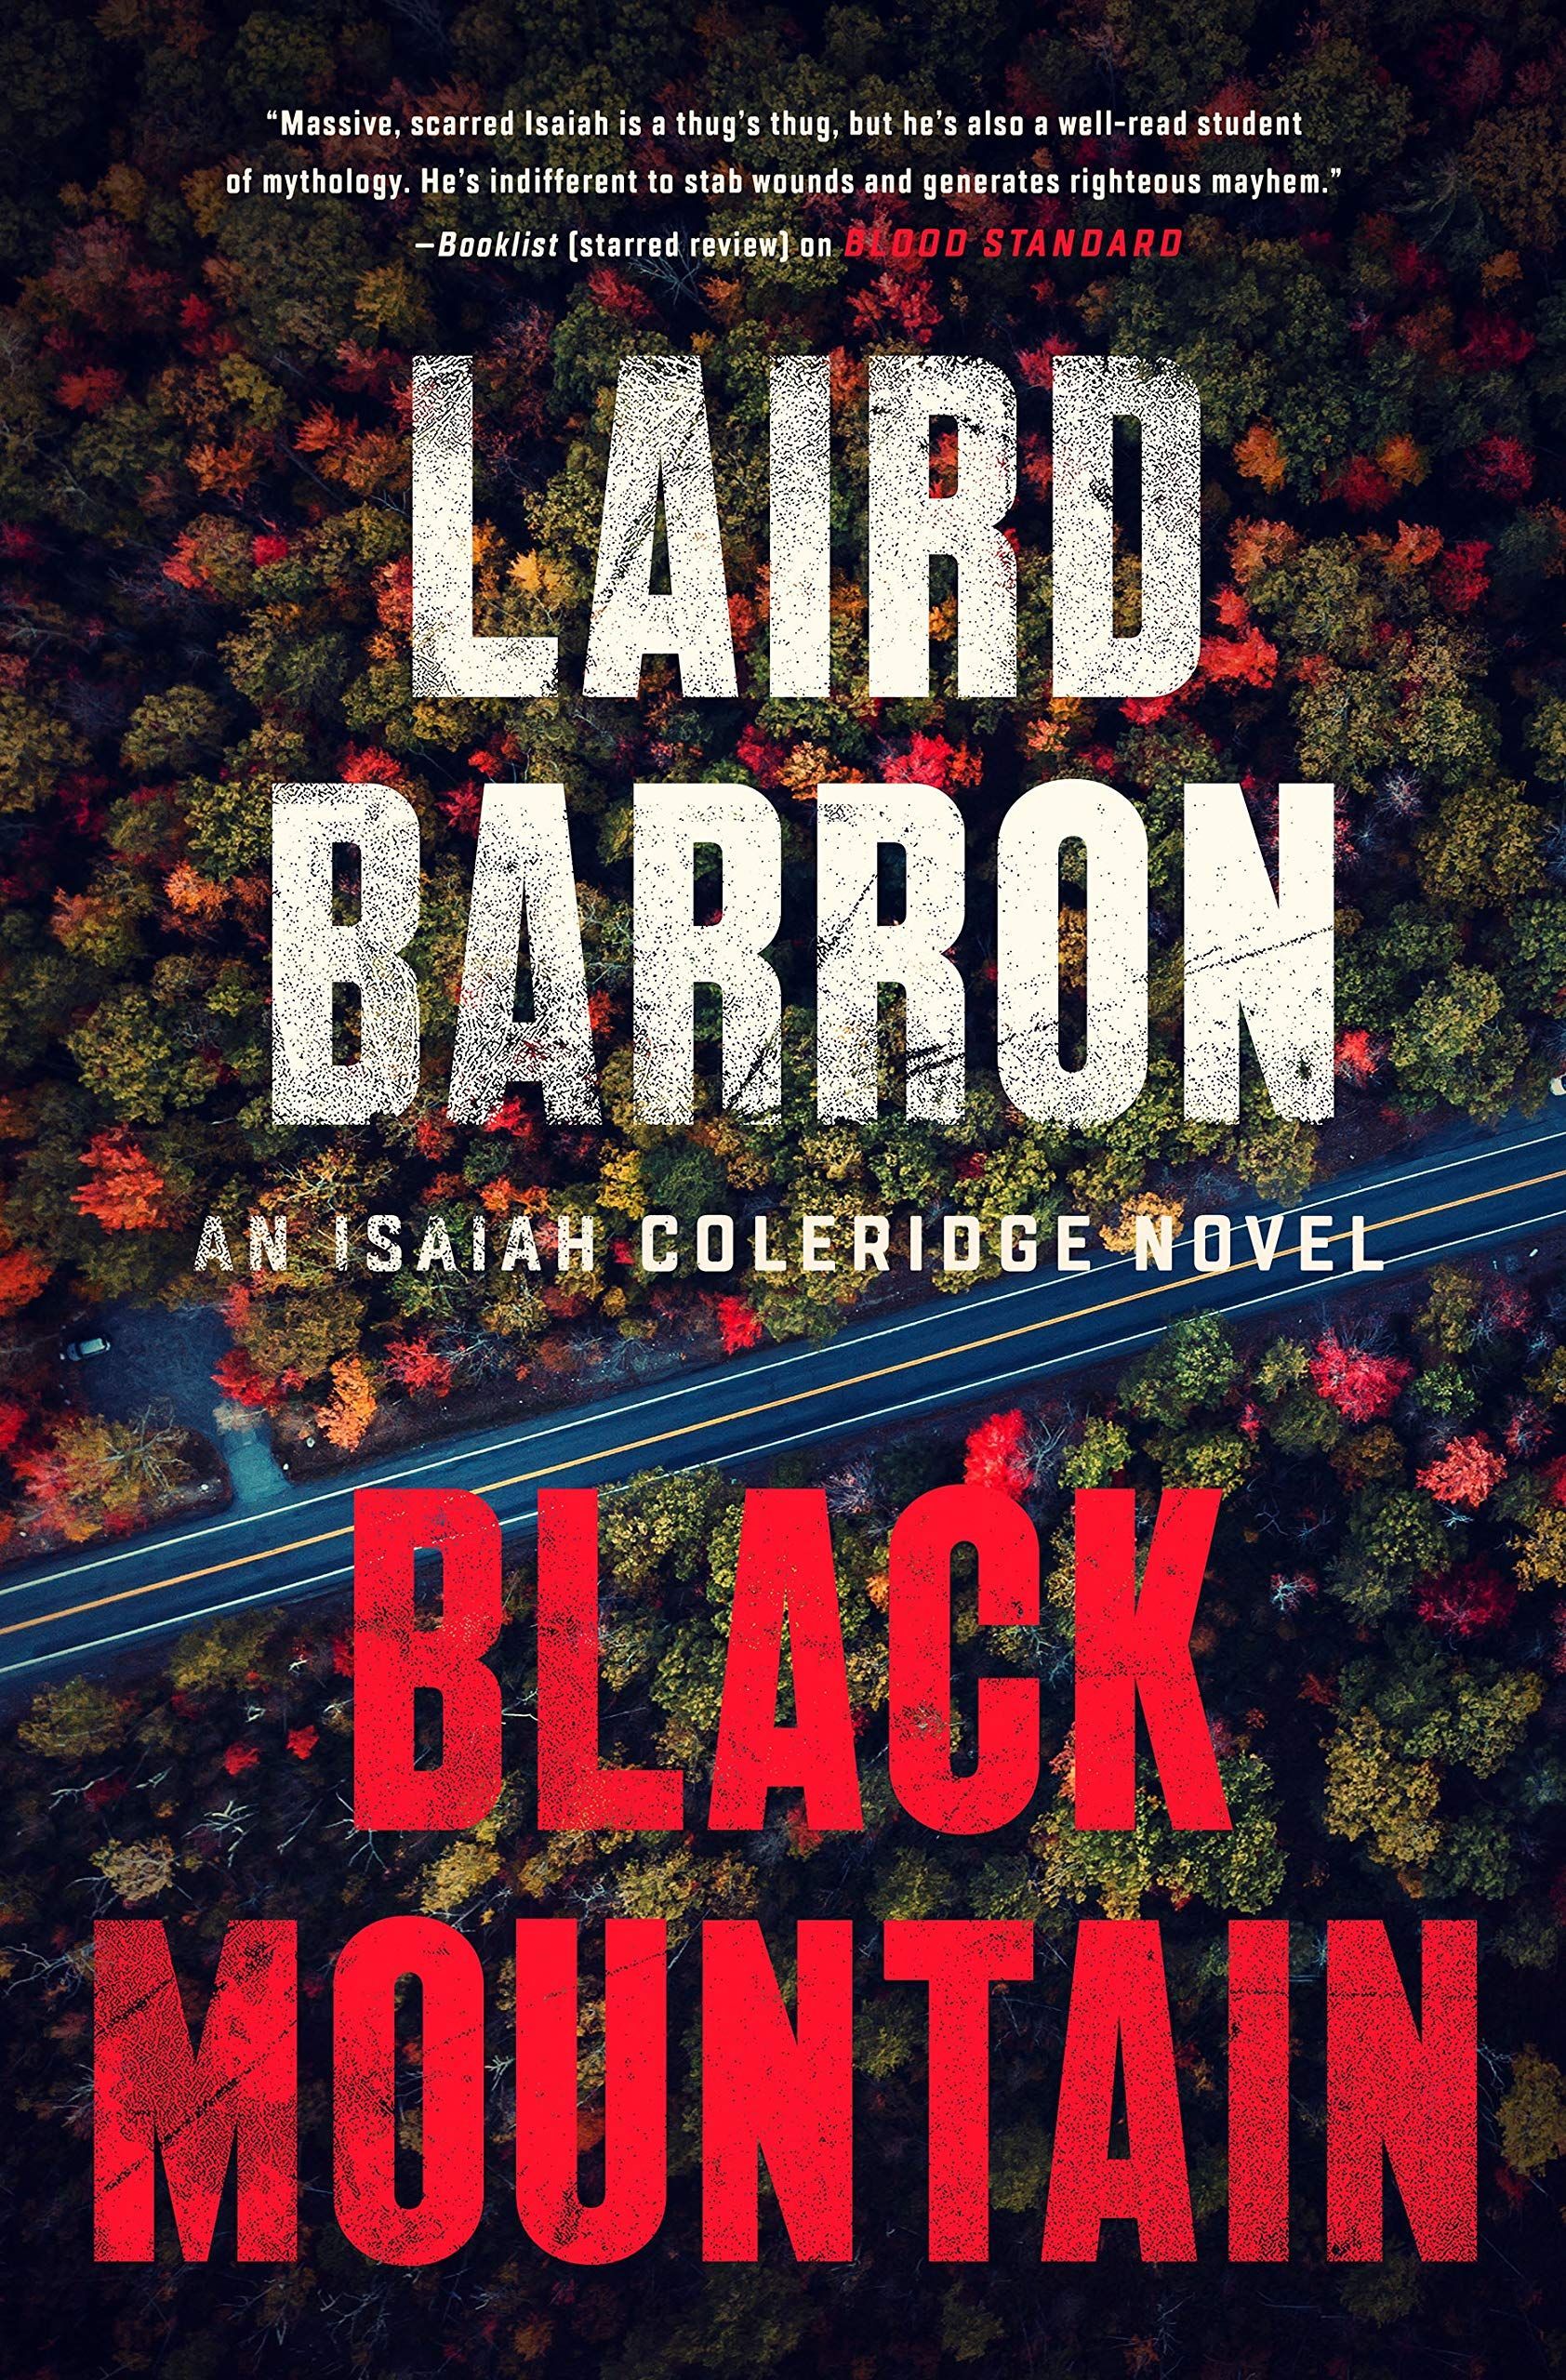 Cosmic Horror and Pulpy Noir: On Laird Barron’s “Black Mountain”